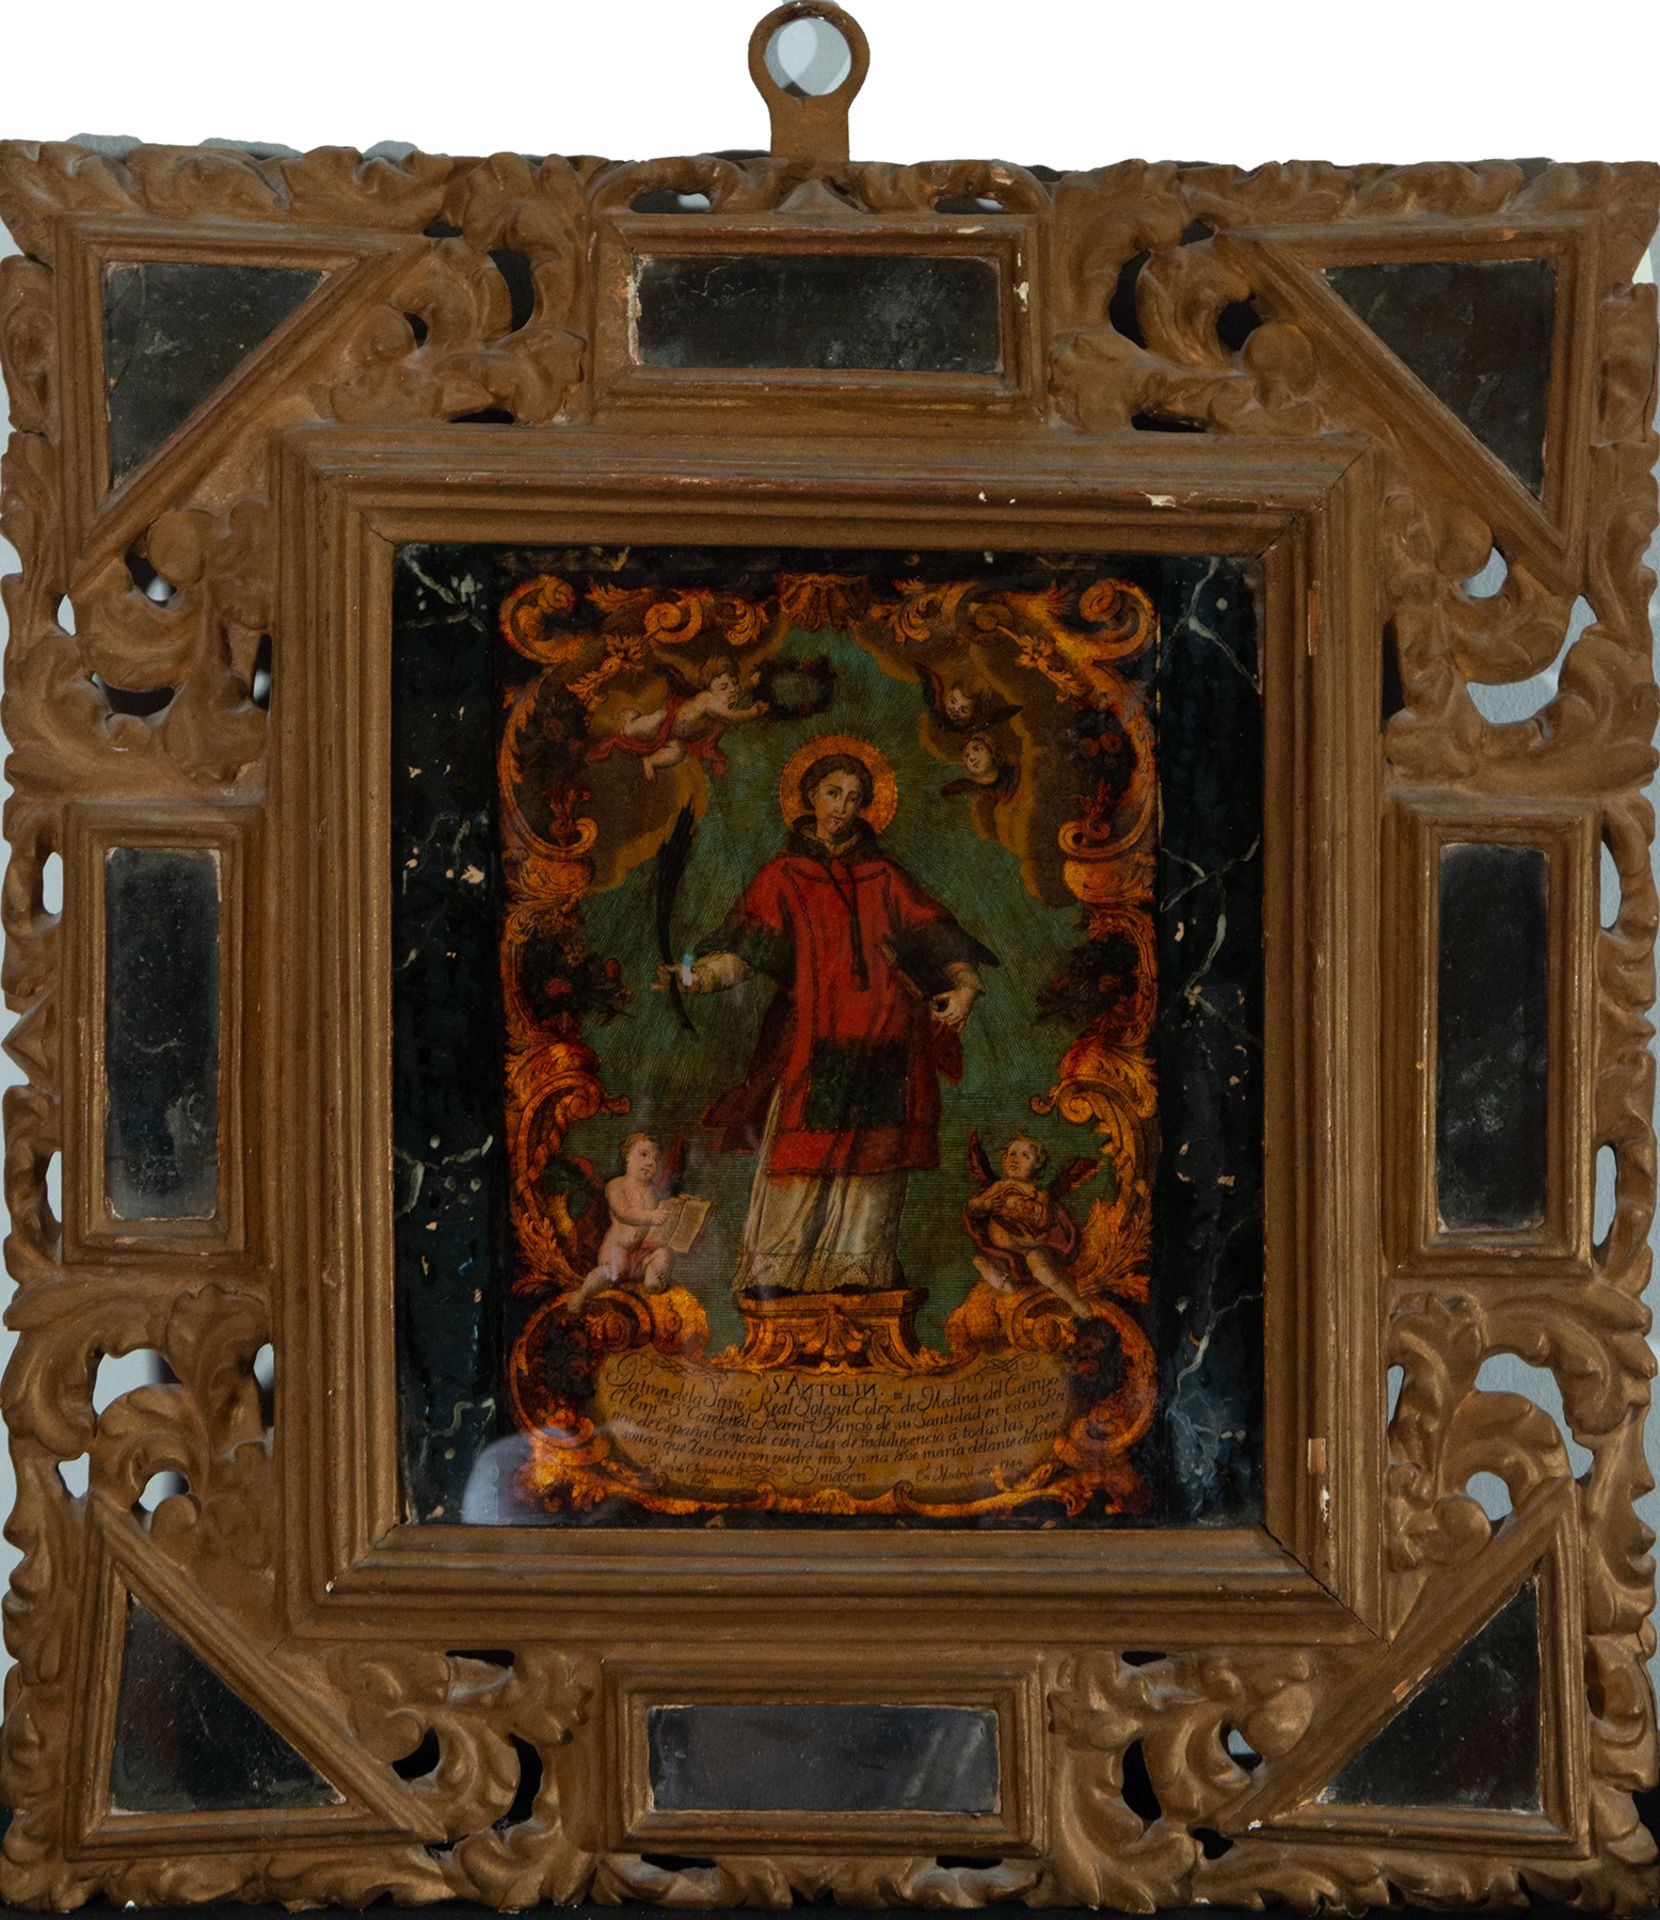 Cornucopia-type colonial Novohispano frame with mirrors from the early 18th century, with hand-paint